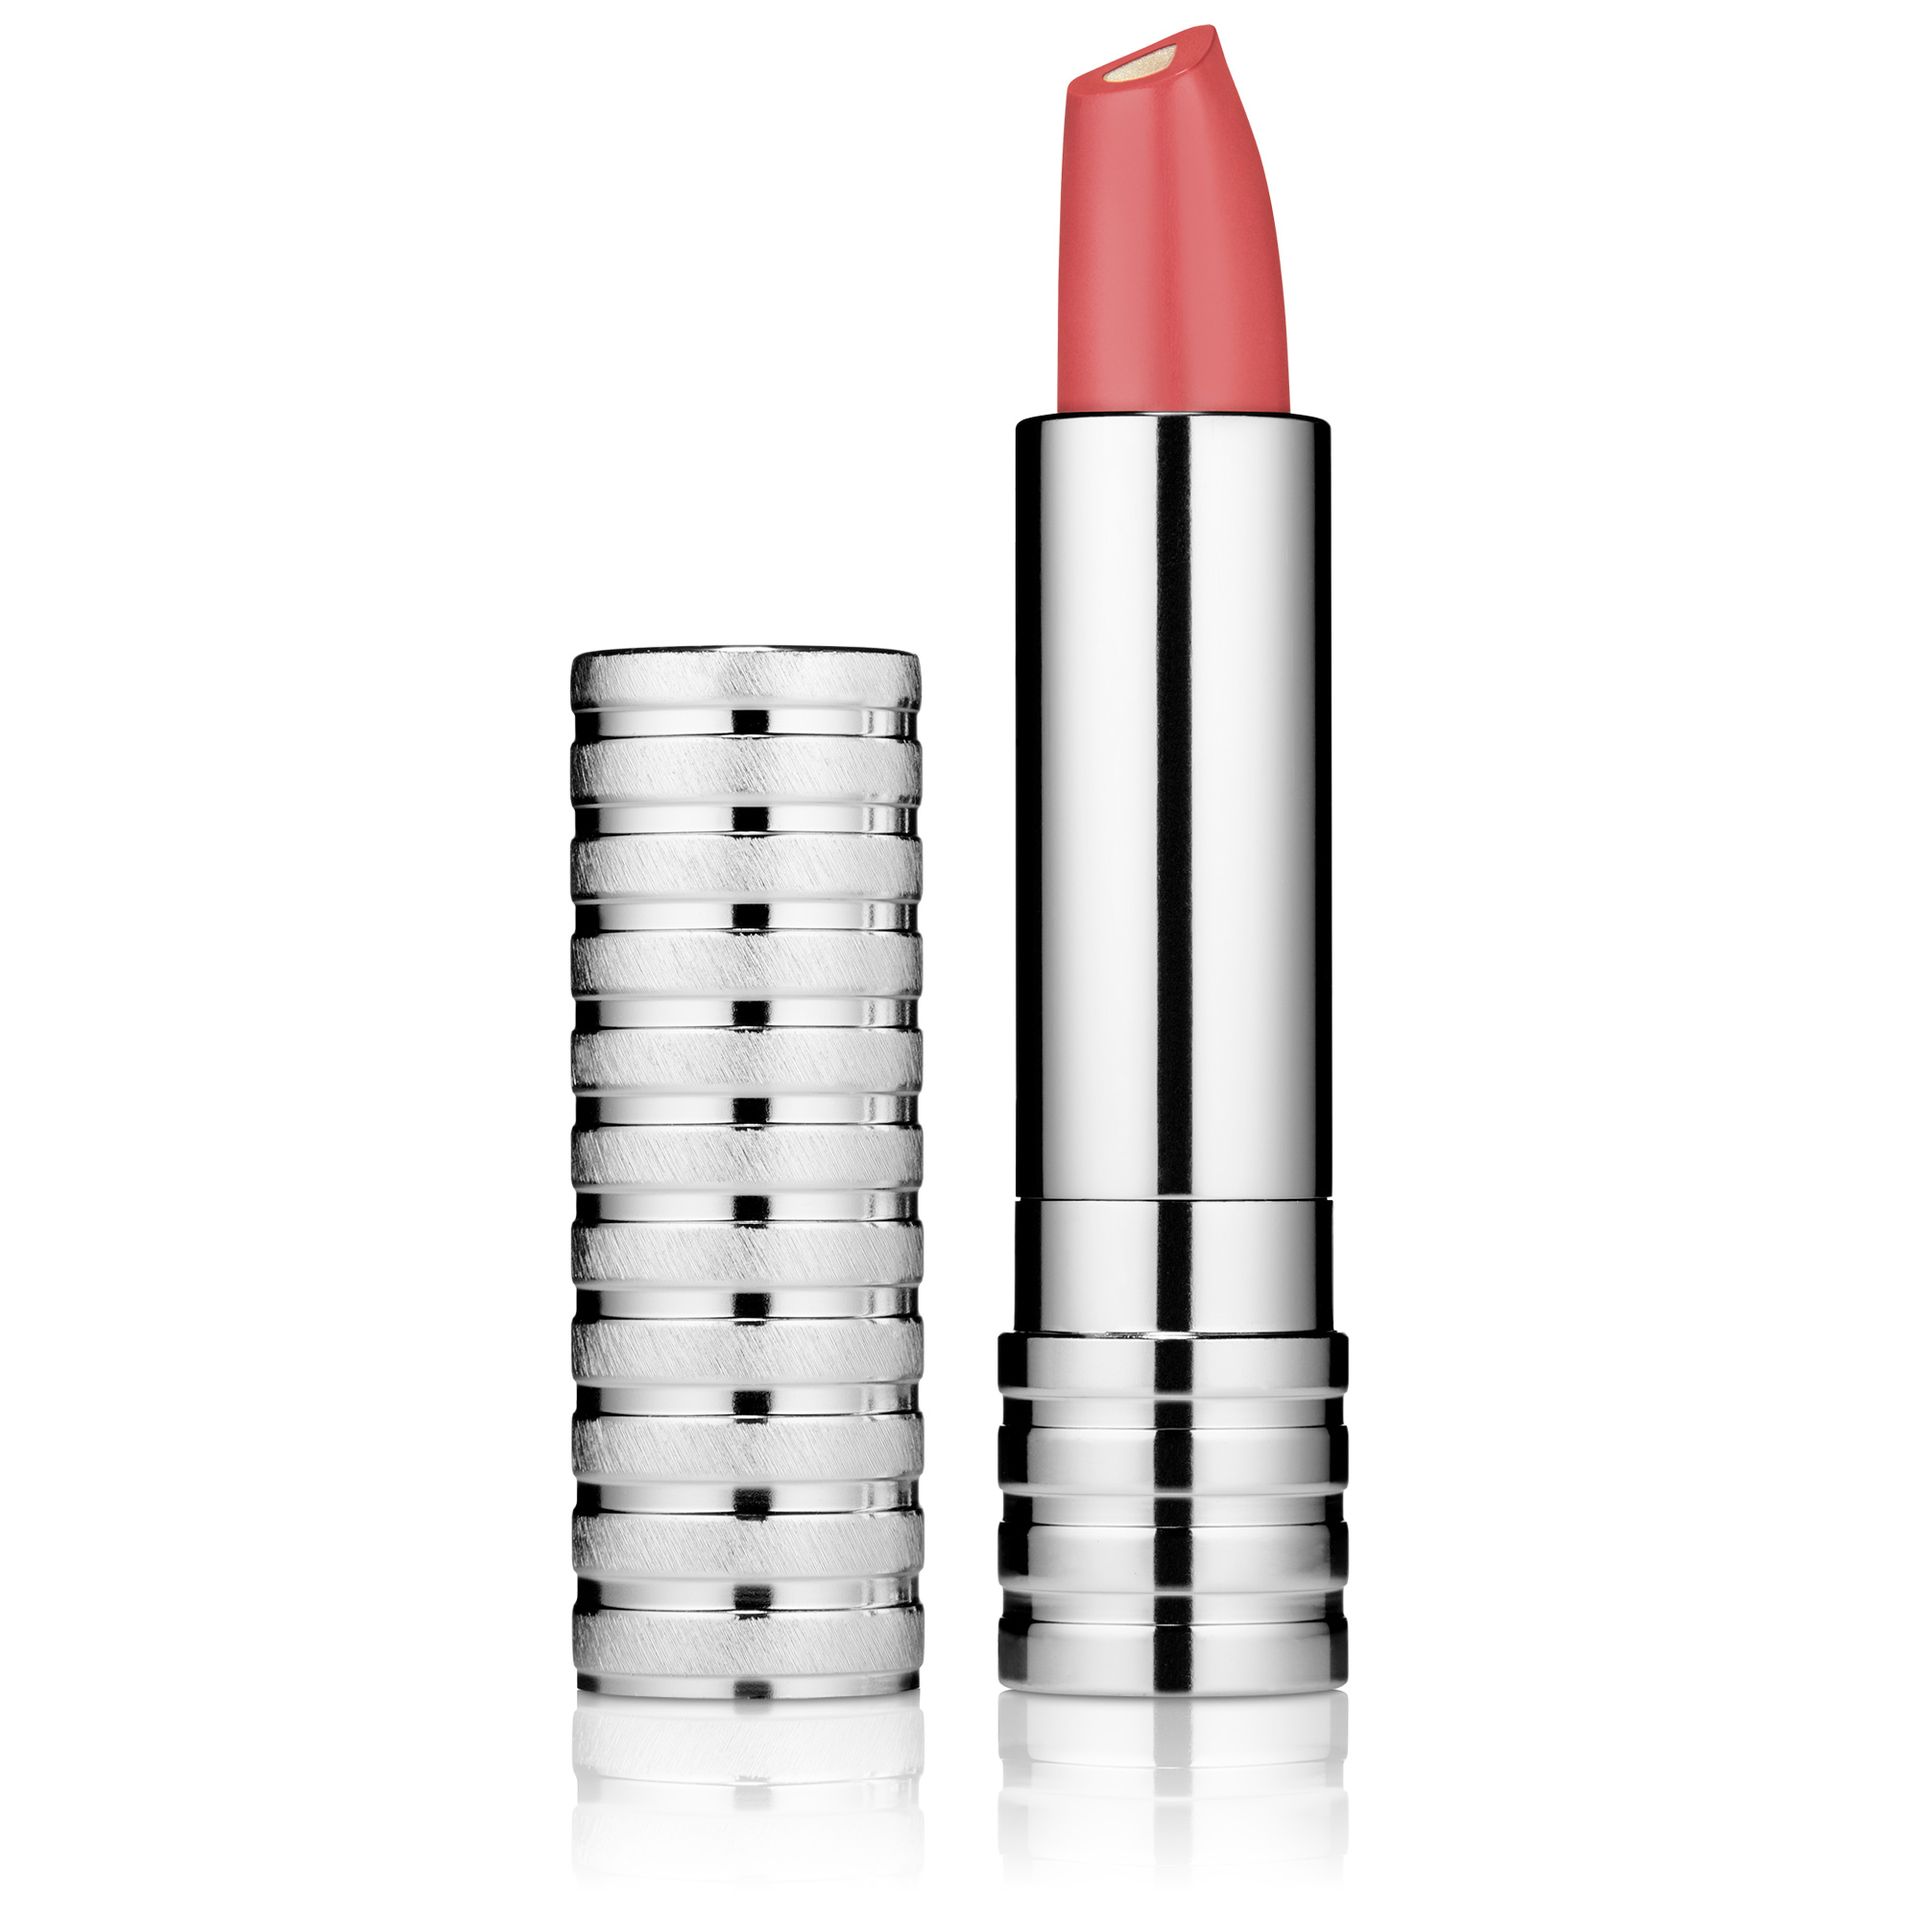 Clinique Dramatically Different Lipstick Shaping Lip Colour 17 Strawberry Ice pomadka do ust 3g